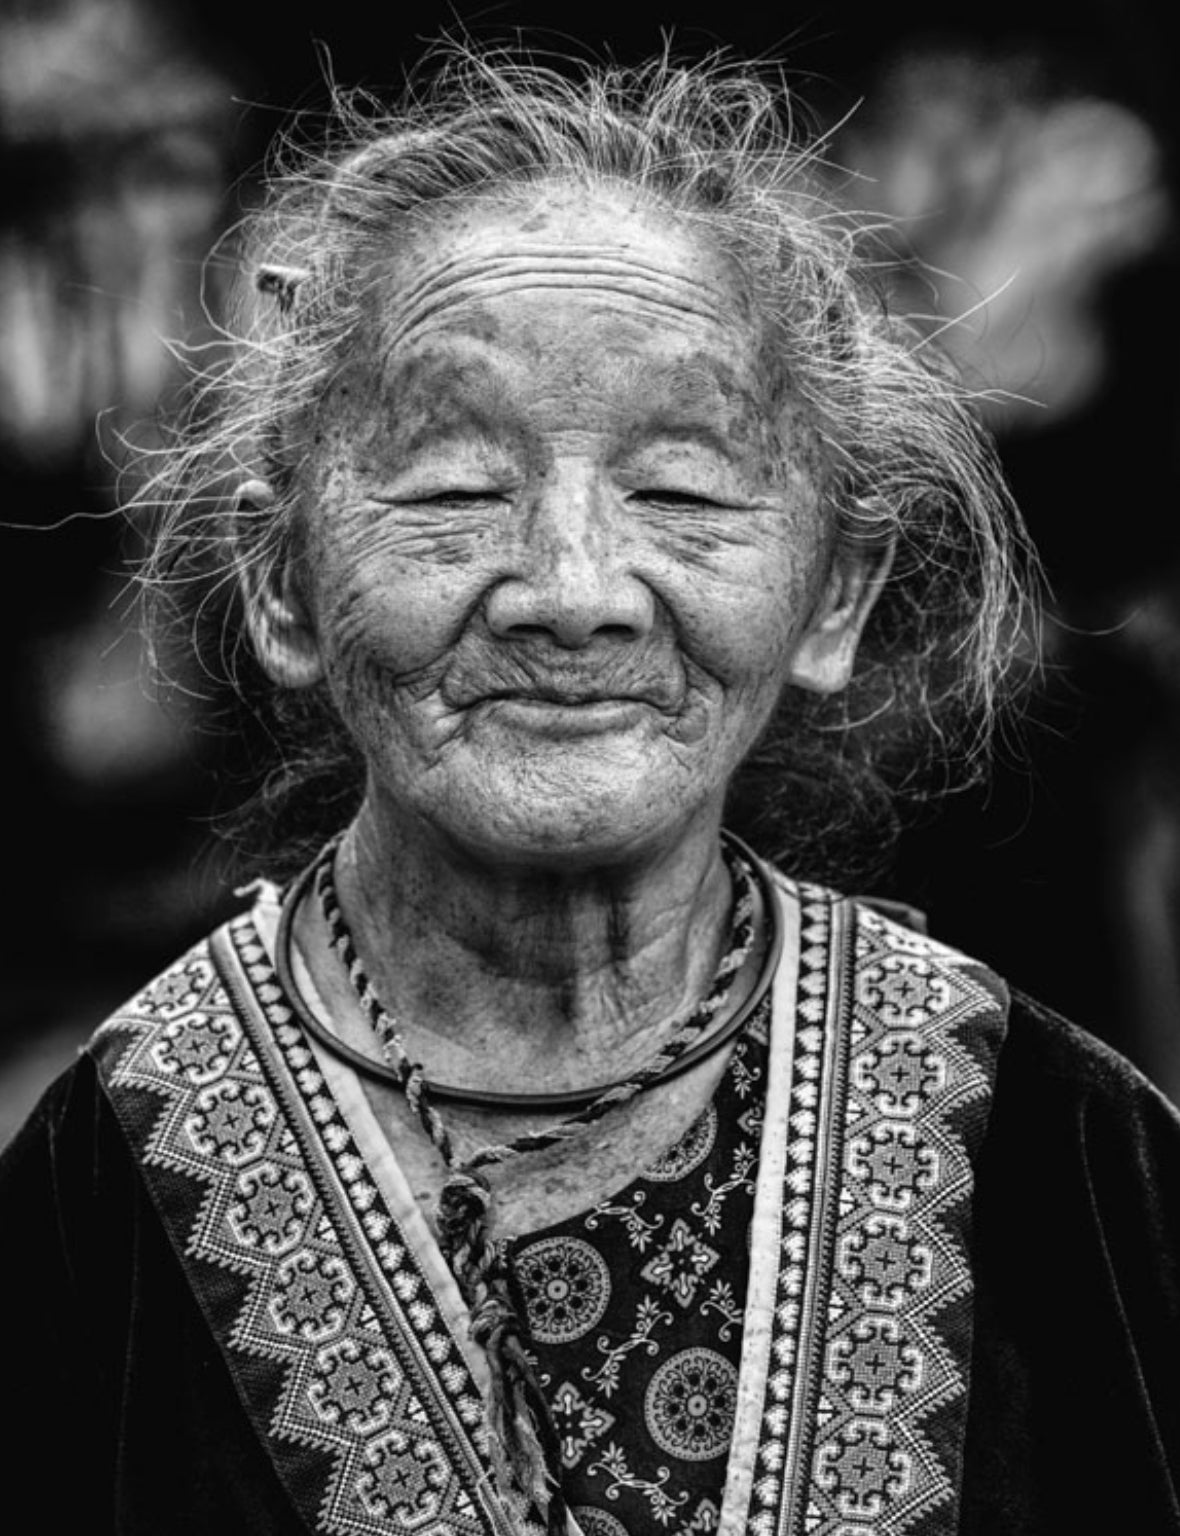 Serge Anton Canvas "old Chinese lady"